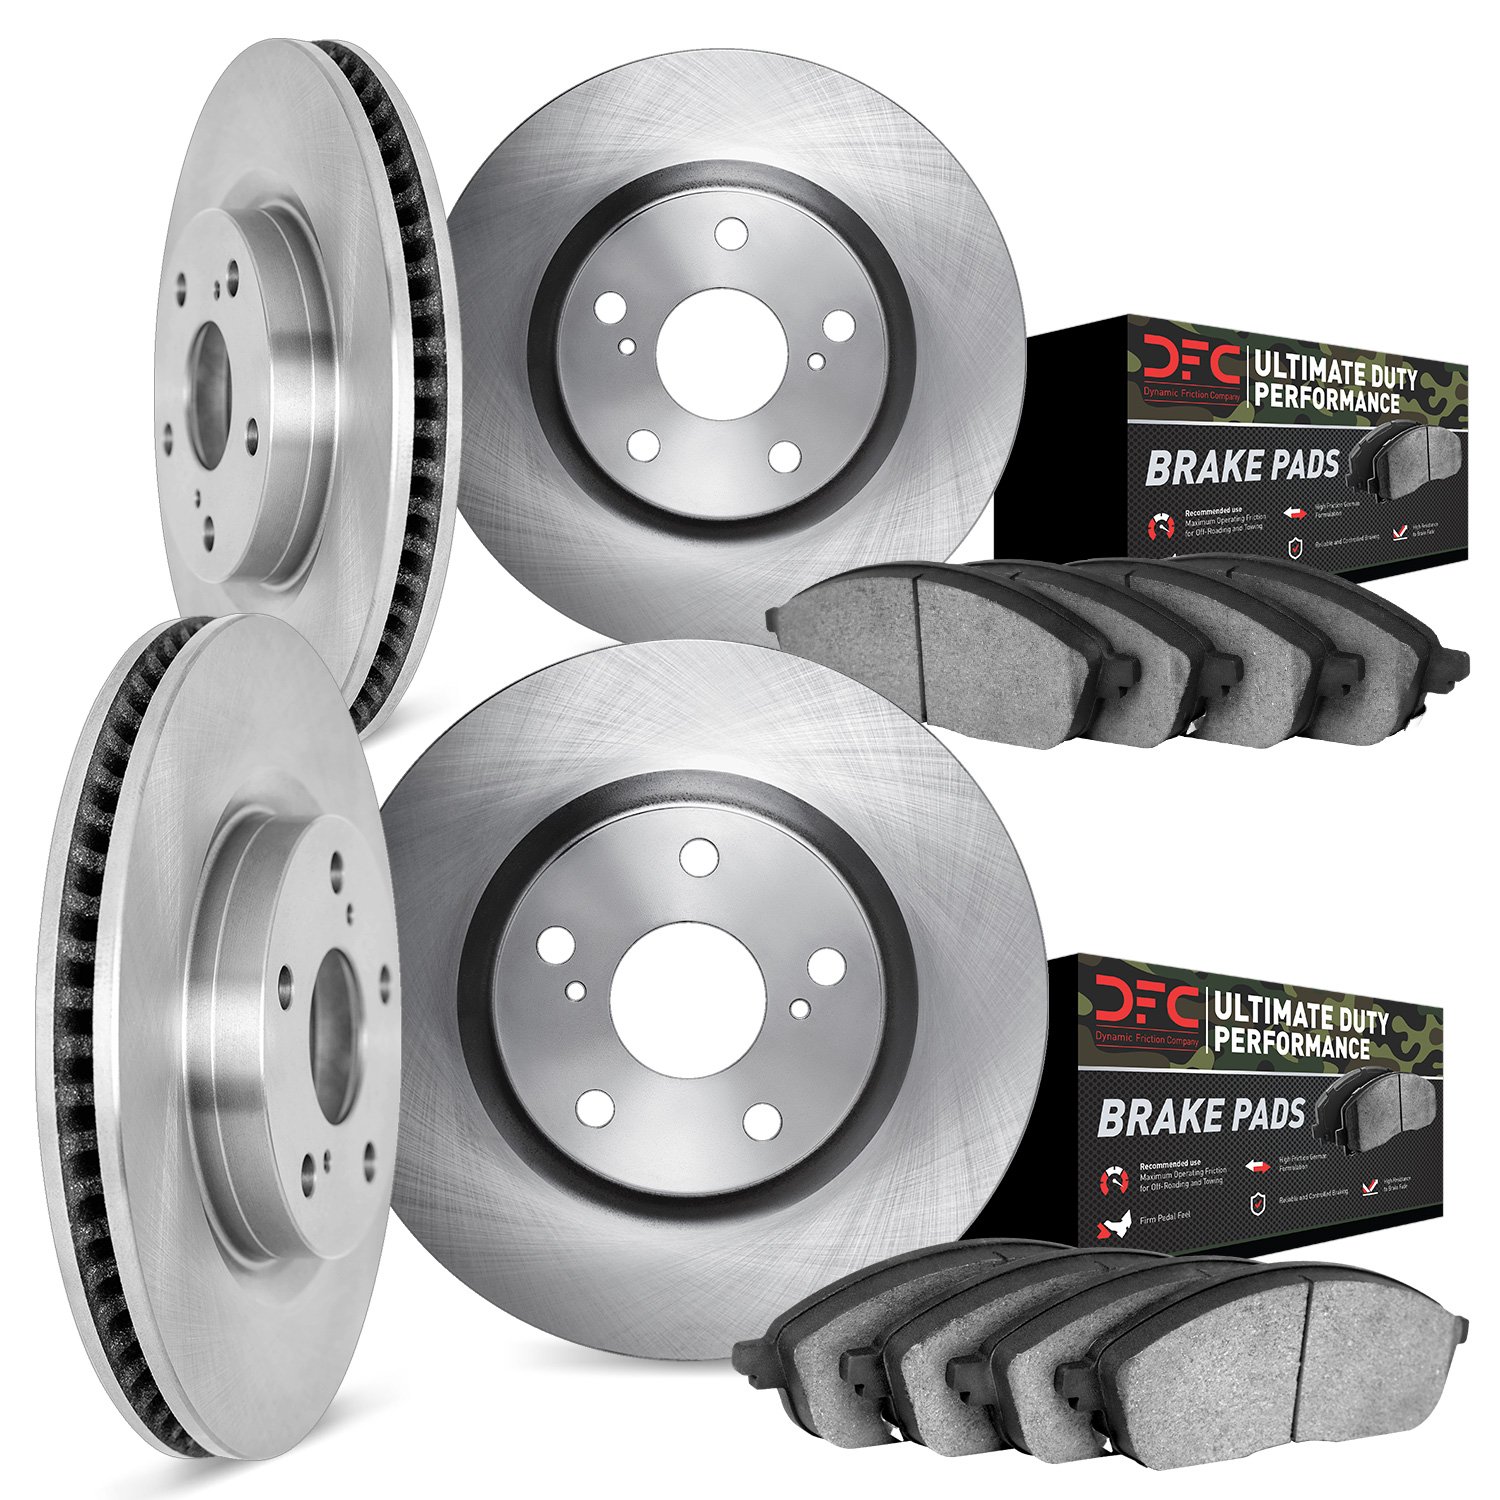 6404-45005 Brake Rotors with Ultimate-Duty Brake Pads, 2010-2015 GM, Position: Front and Rear